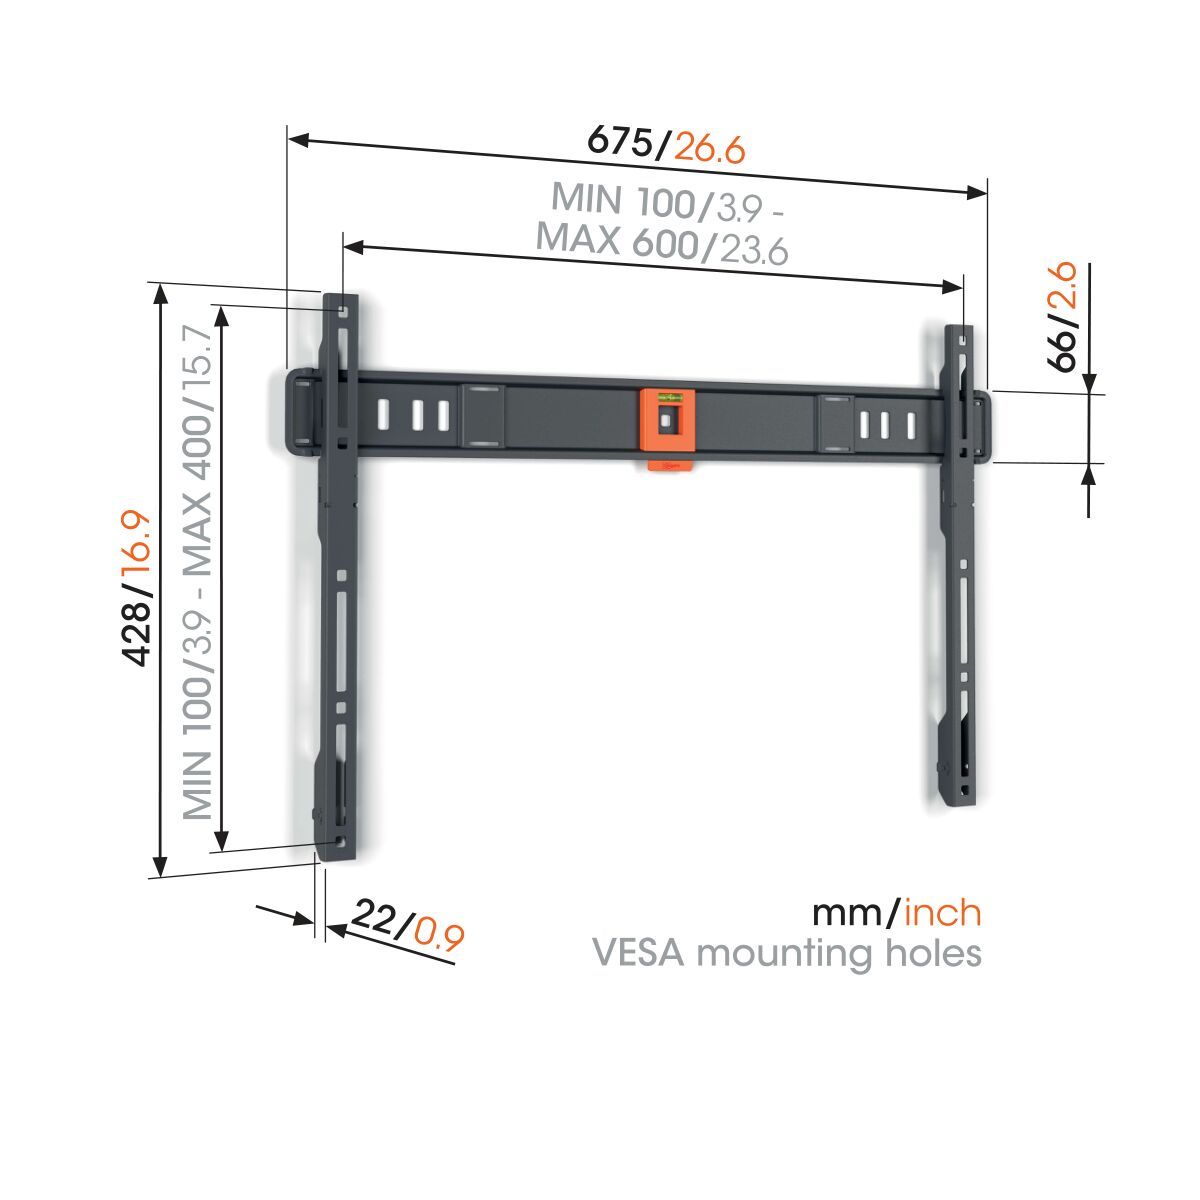 Vogel's TVM 1605 Fixed TV Wall Mount - Suitable for 40 up to 100 inch TVs - Dimensions